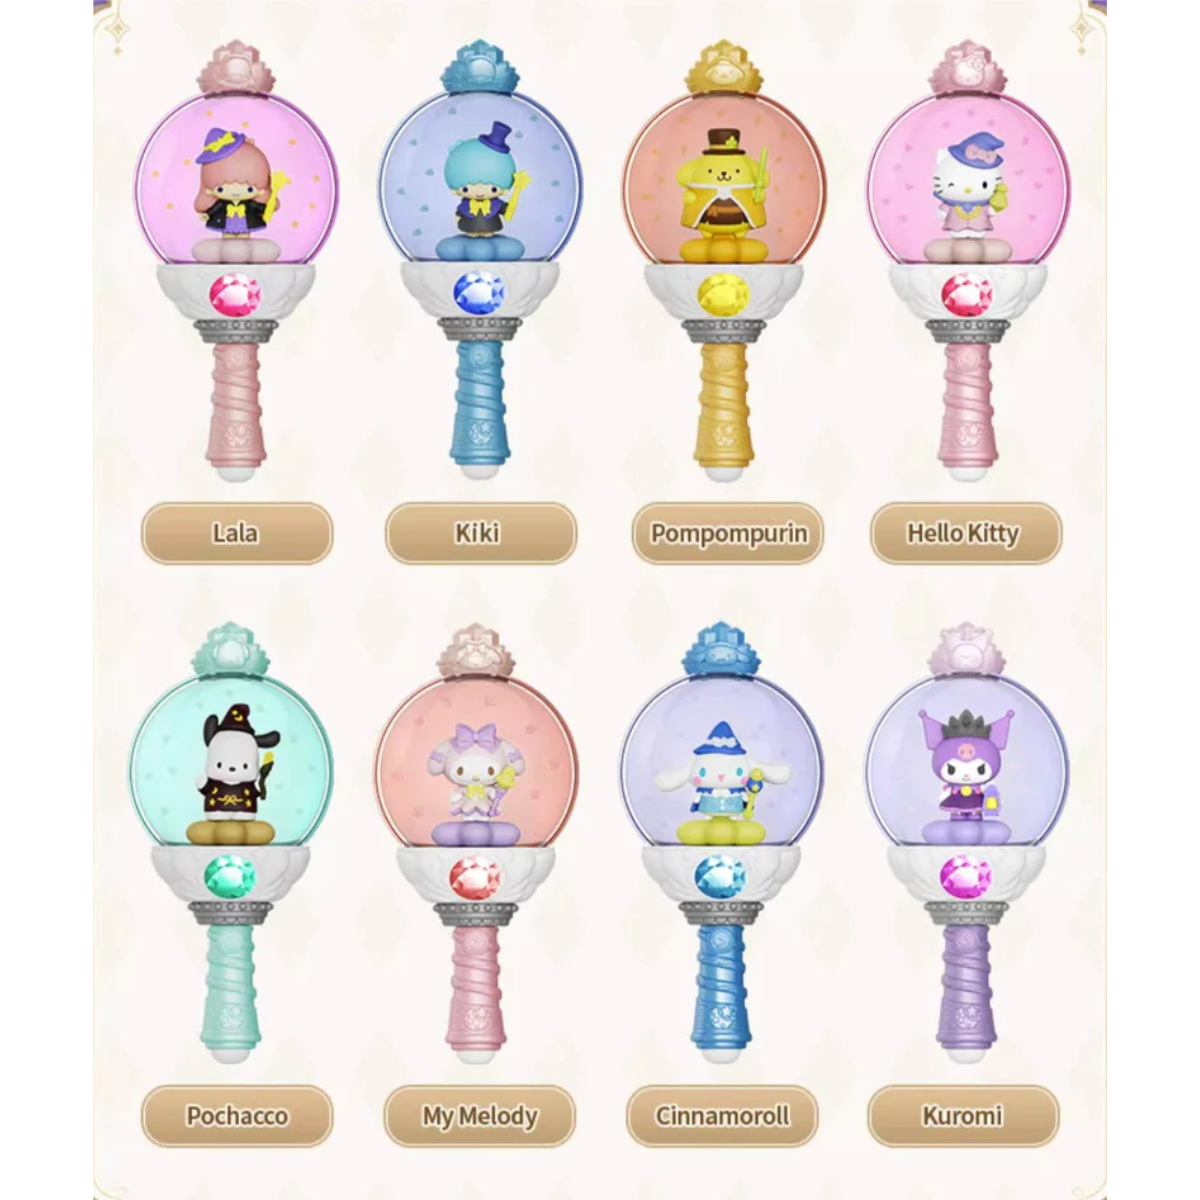 Lioh Toy x Sanrio Characters Magic Fairy Wand Series 2-Single Box (Random)-Lioh Toy-Ace Cards &amp; Collectibles